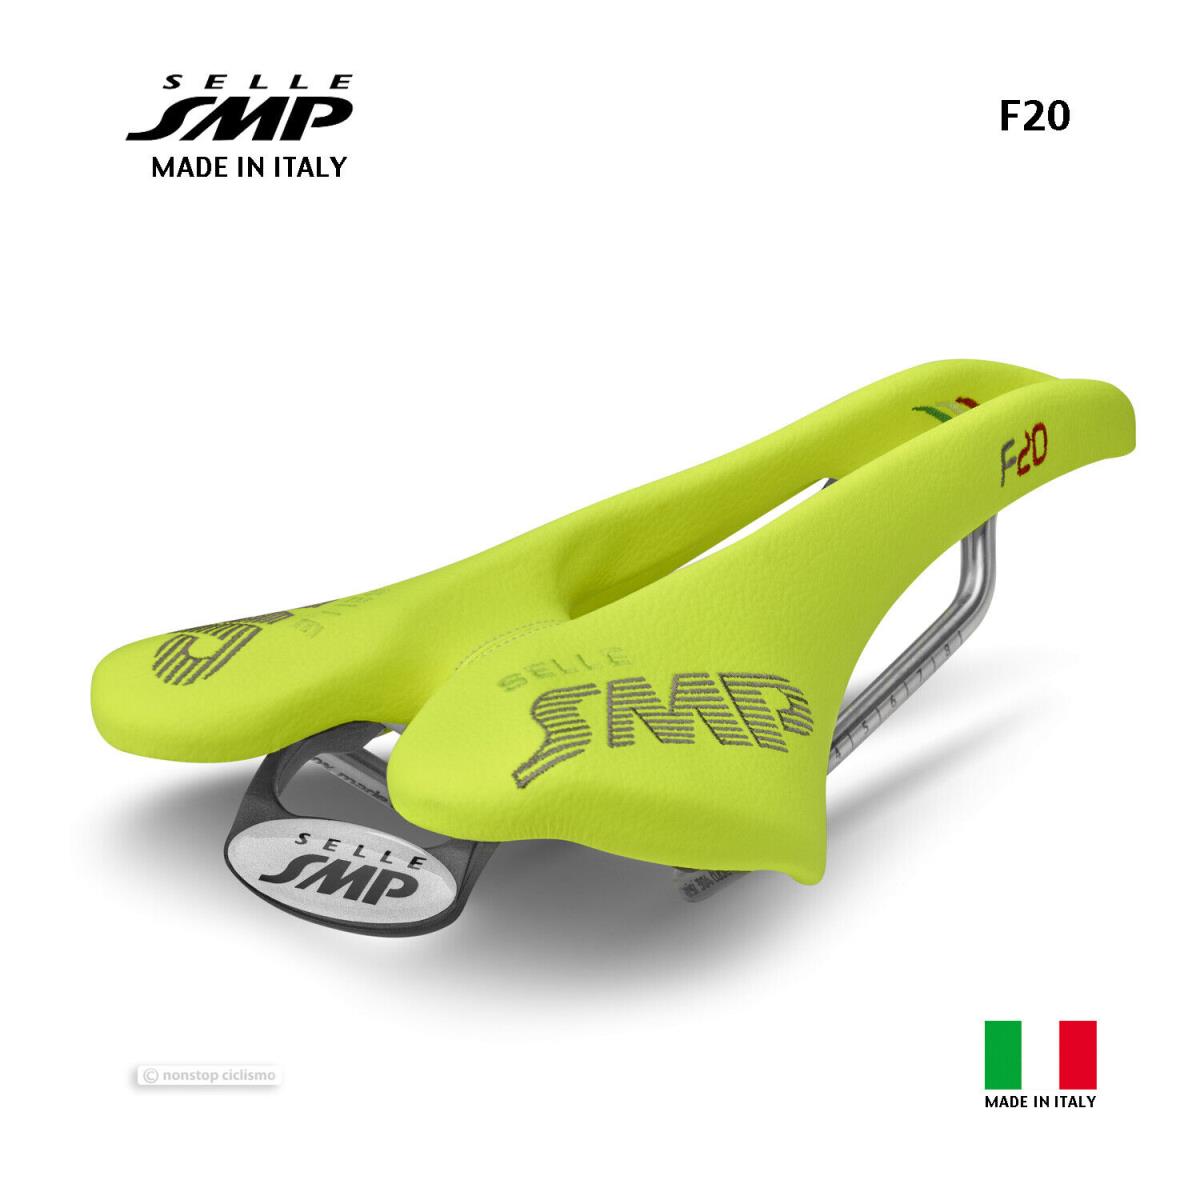 Selle Smp F20 Saddle : Yellow Fluo - Made IN Italy